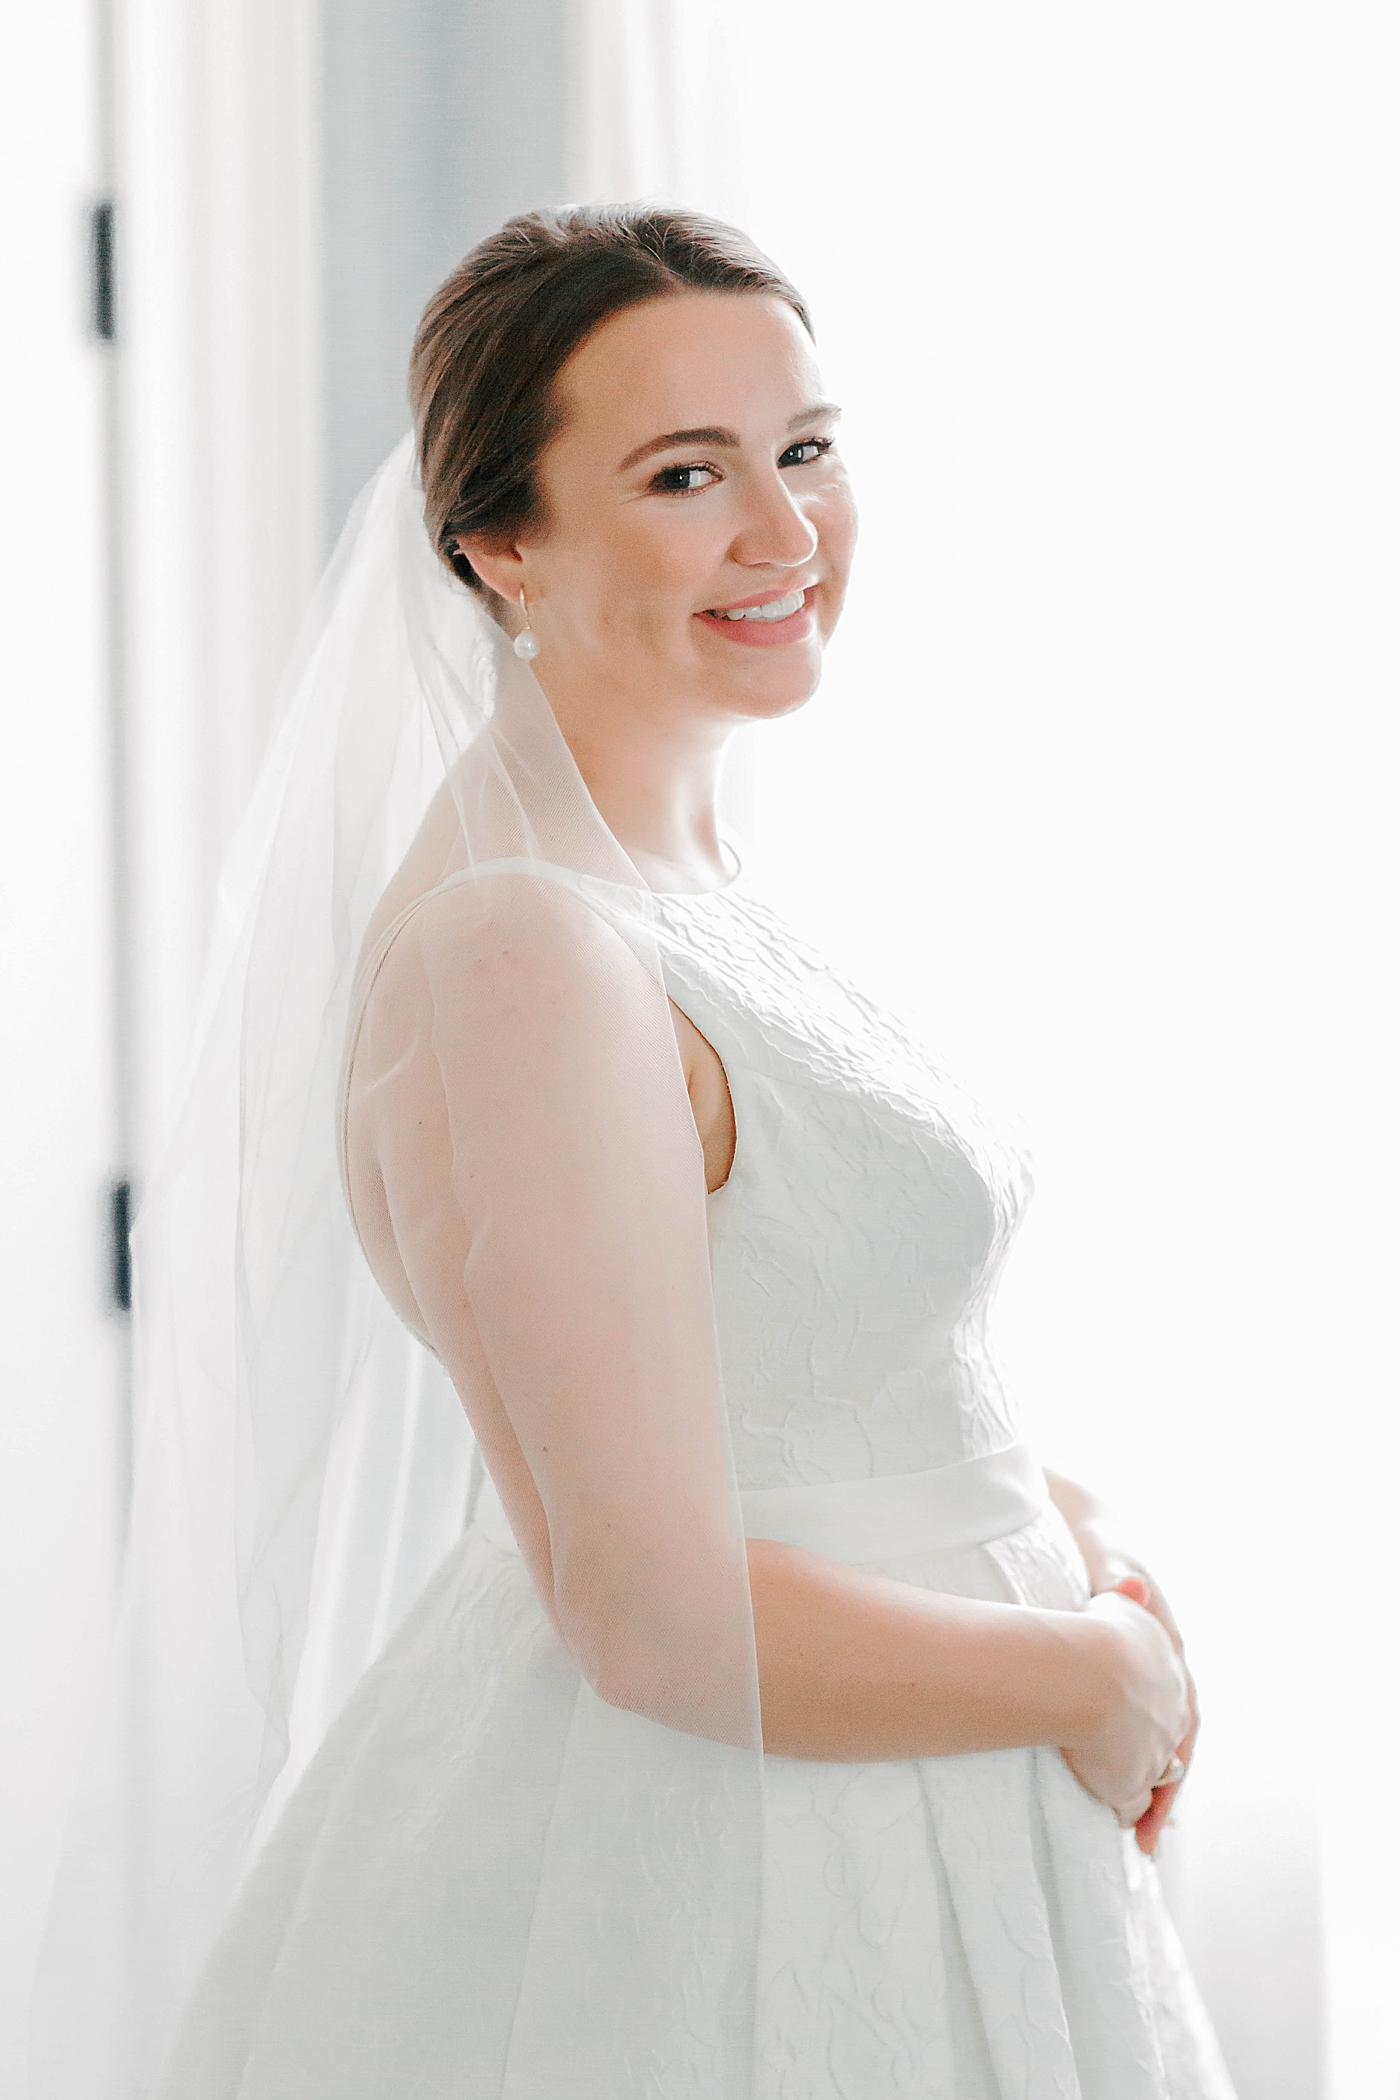 Bride smiling near a window | Carters Event Co